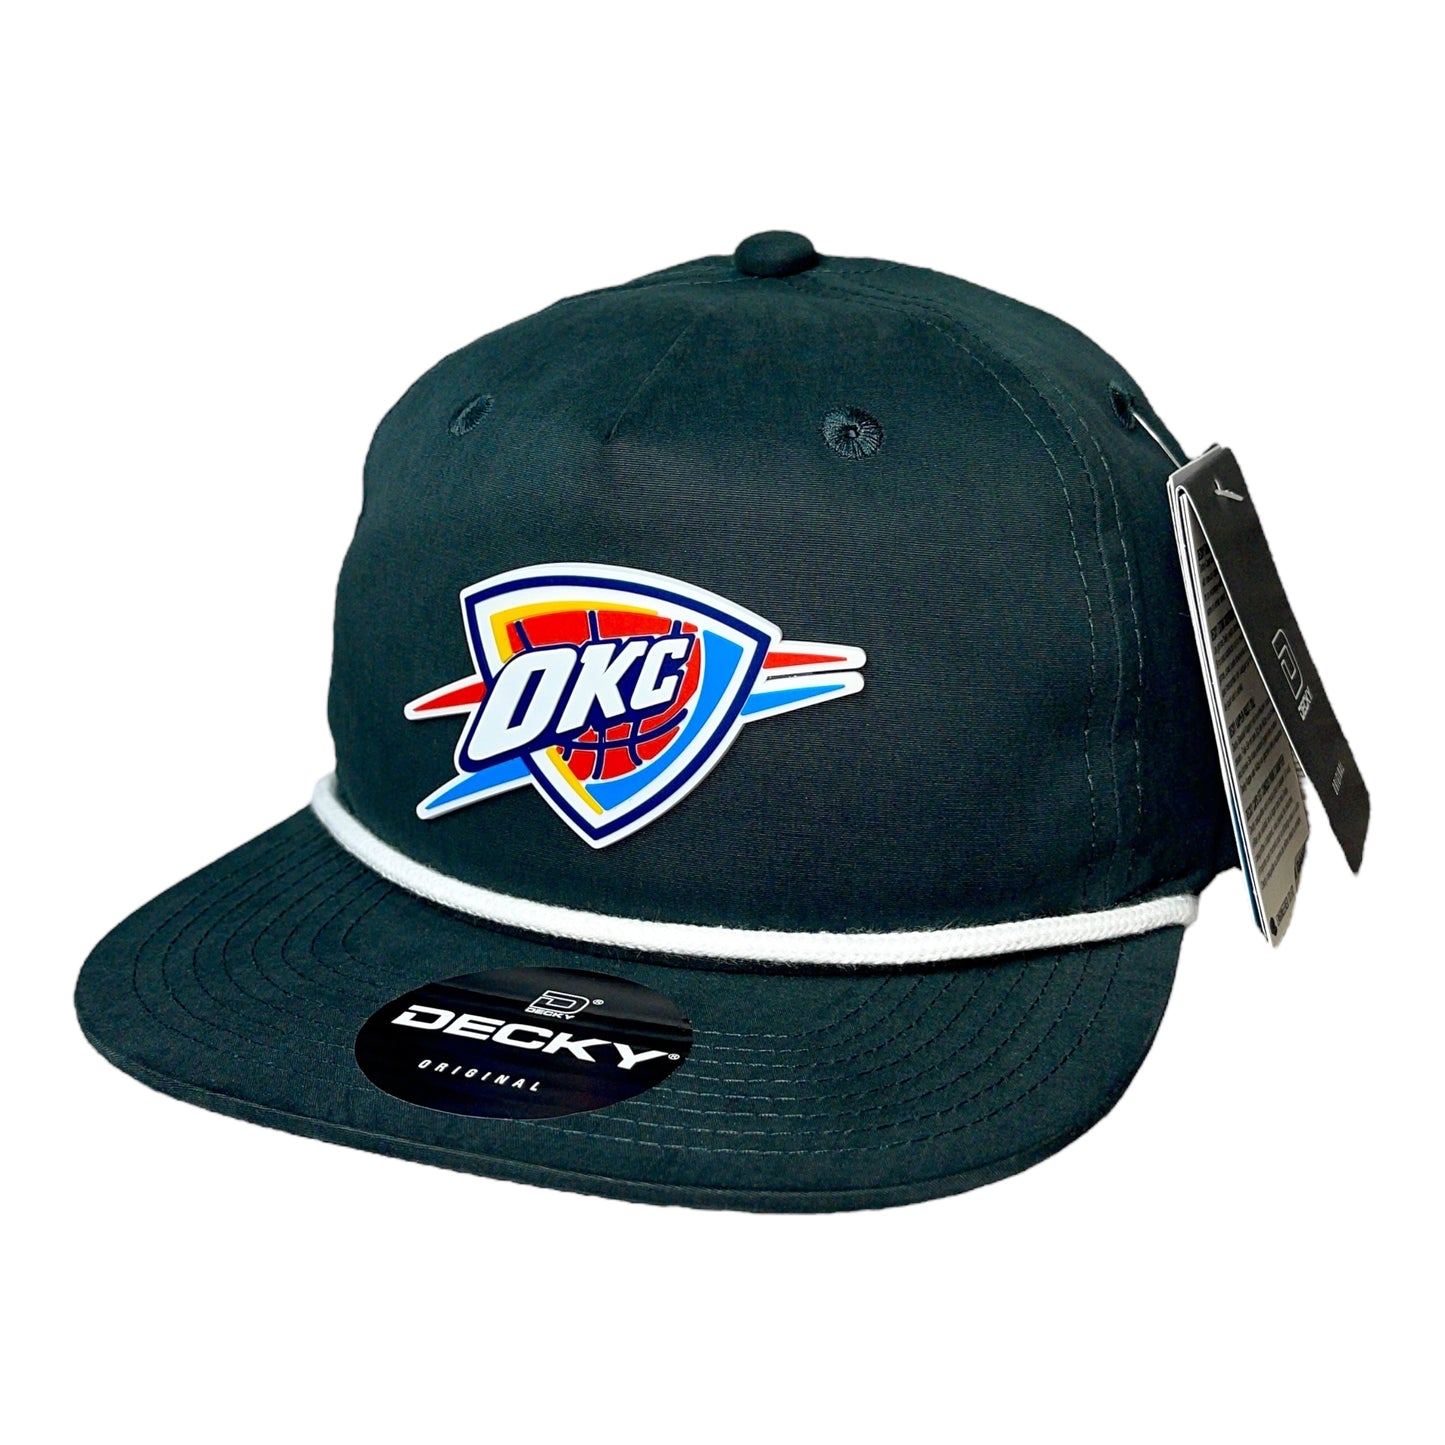 Oklahoma City Thunder 3D Classic Rope Hat- Charcoal/ White